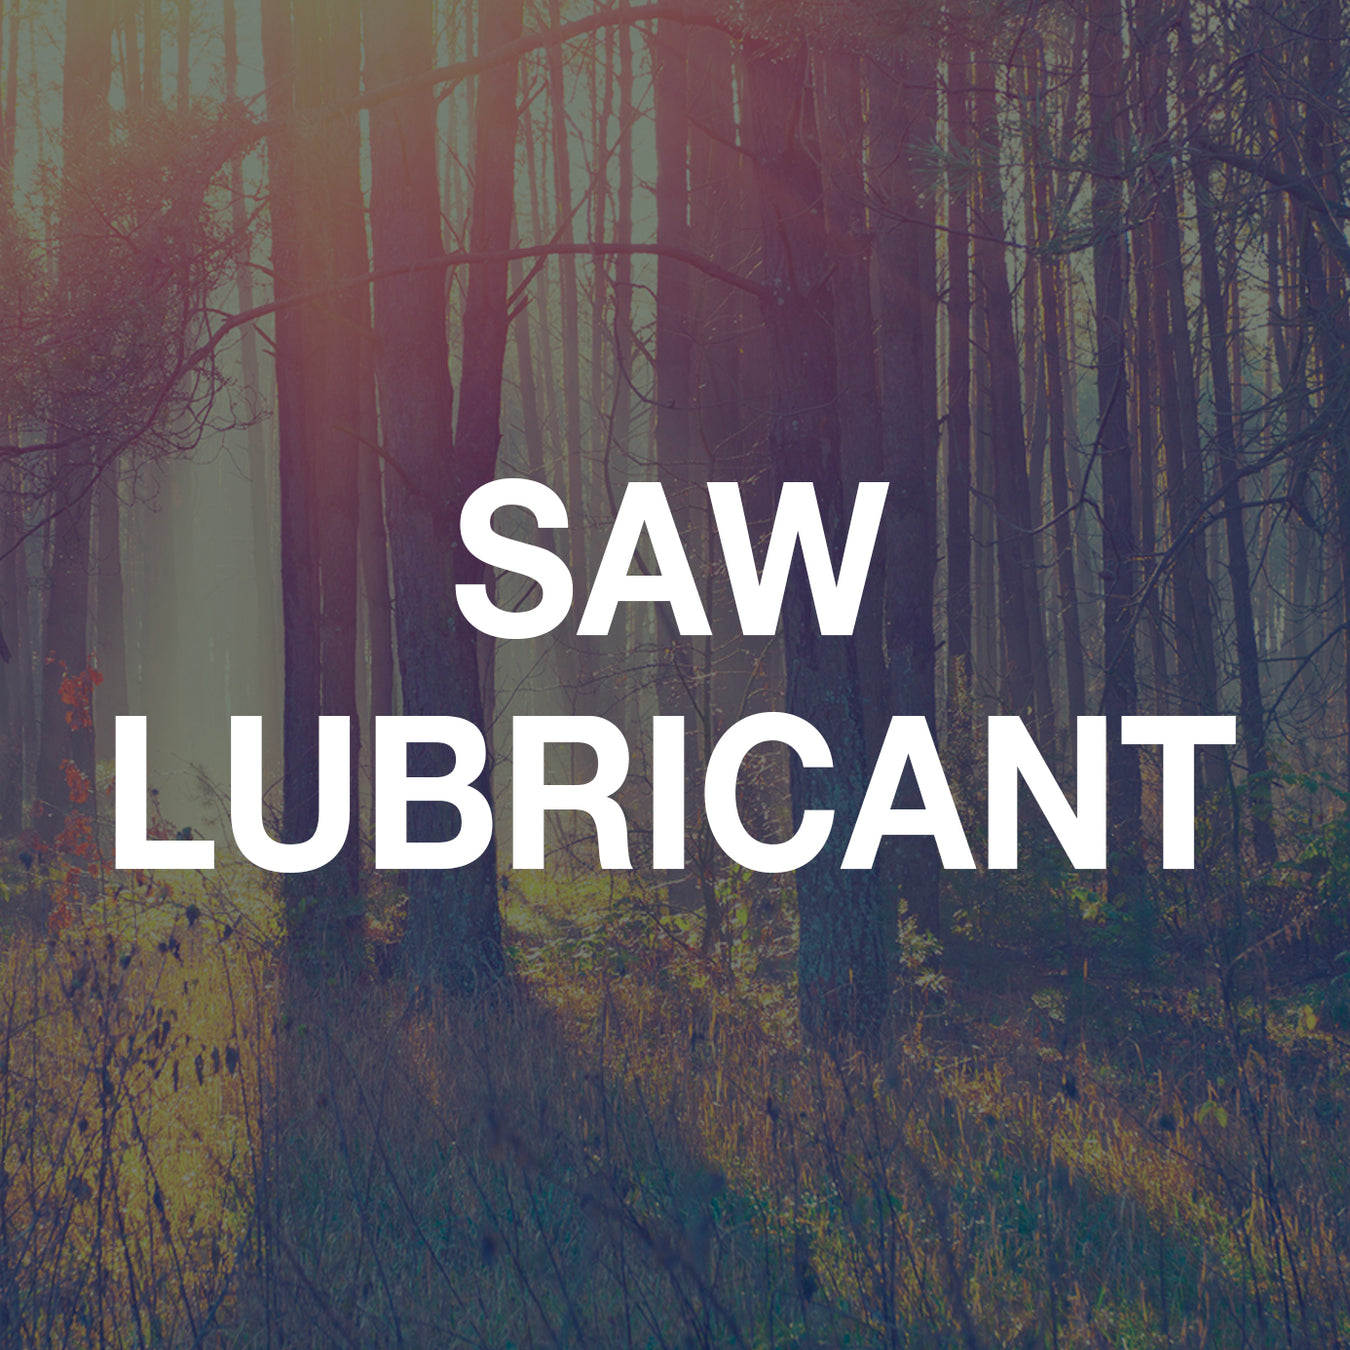 Biolube Saw Lubricant collection sold at Smith Sawmill Service